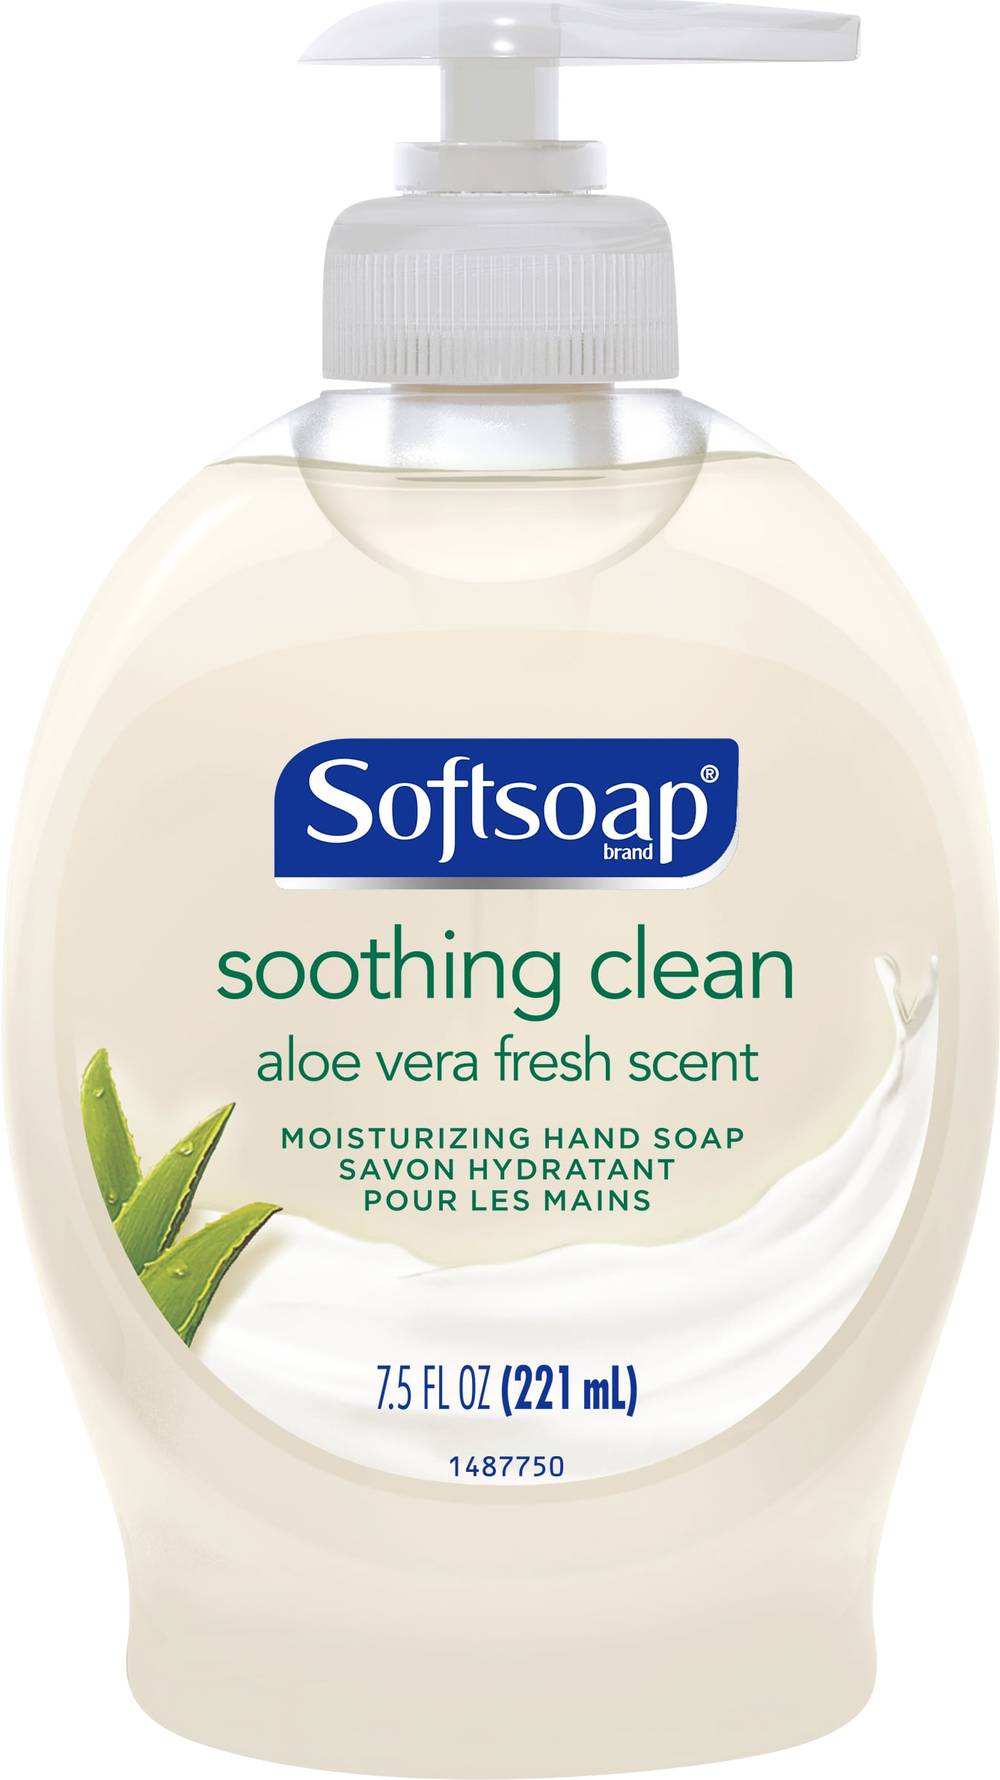 Softsoap Soothing Clean Aloe Vera Hand Soap